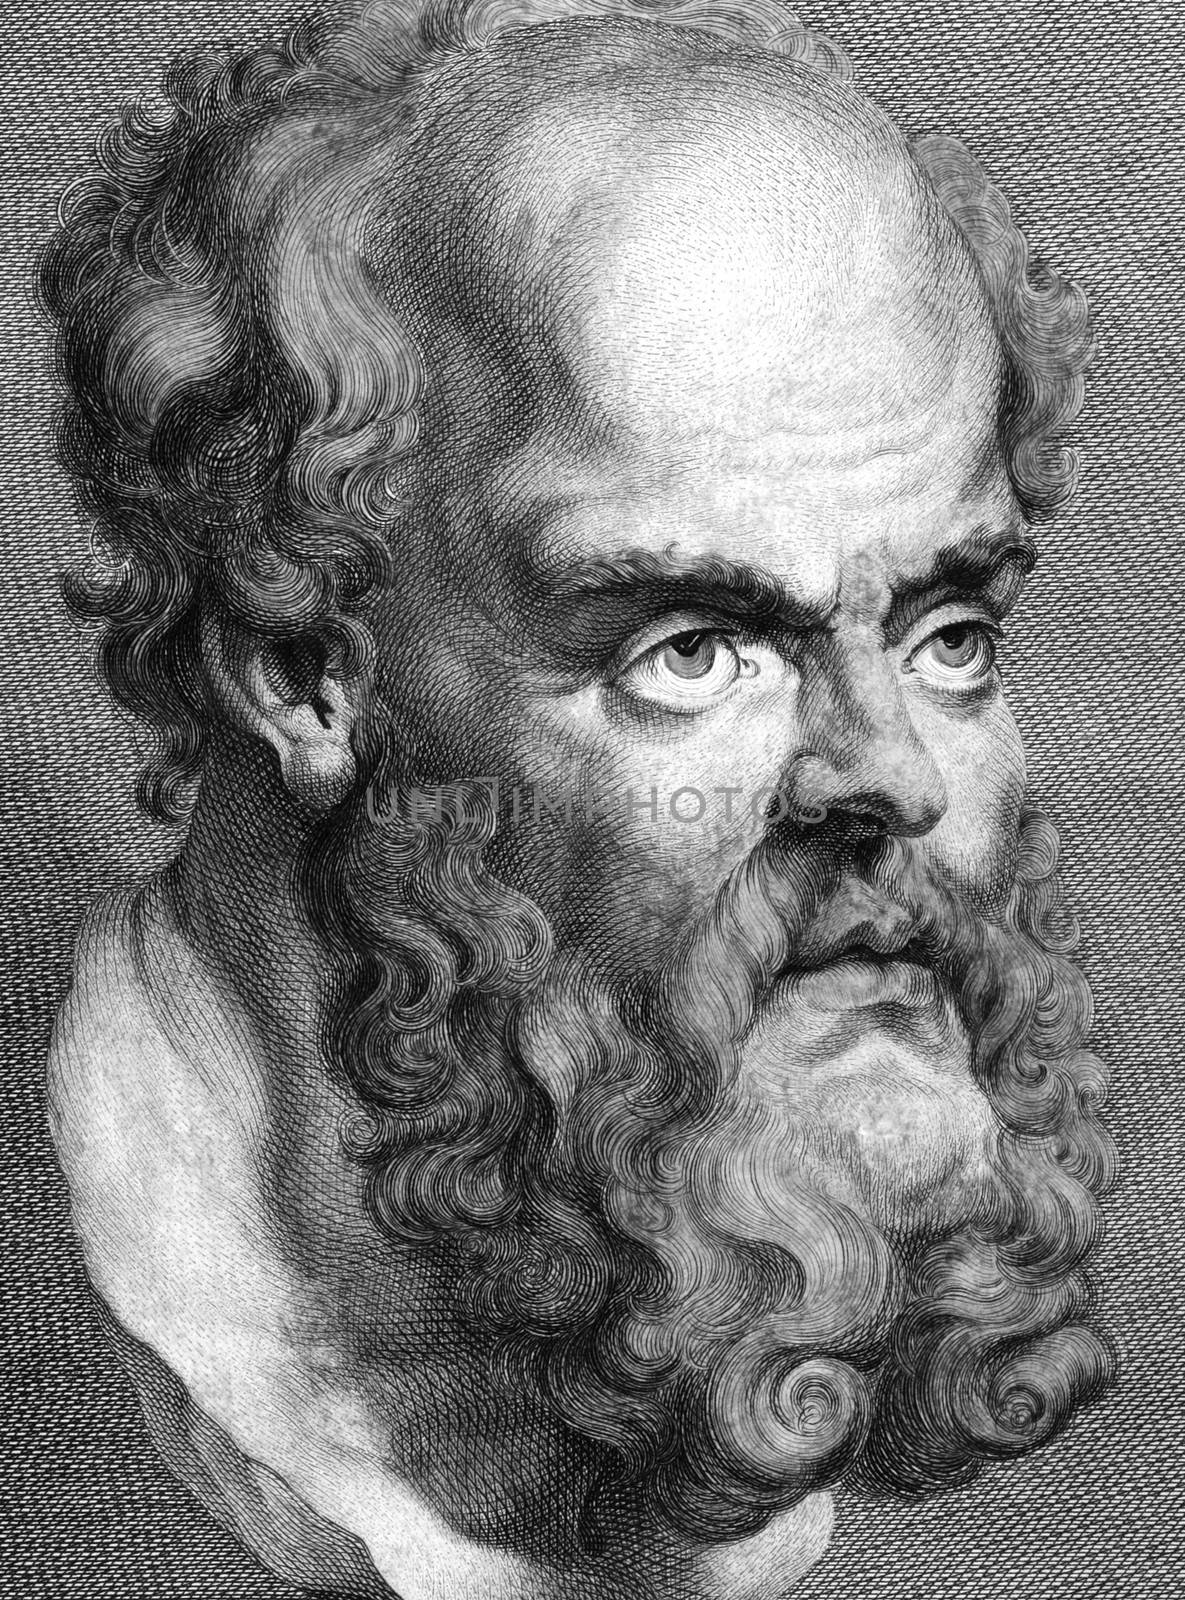 Socrates (469BC-399BC) on engraving from 1788. 
Classical Greek Athenian philosopher. Considered one of the founders of Western philosophy. Engraved by T.Trotter after Peter Paul Rubens and published in ''Essays on Physiognomy'',UK,1788.